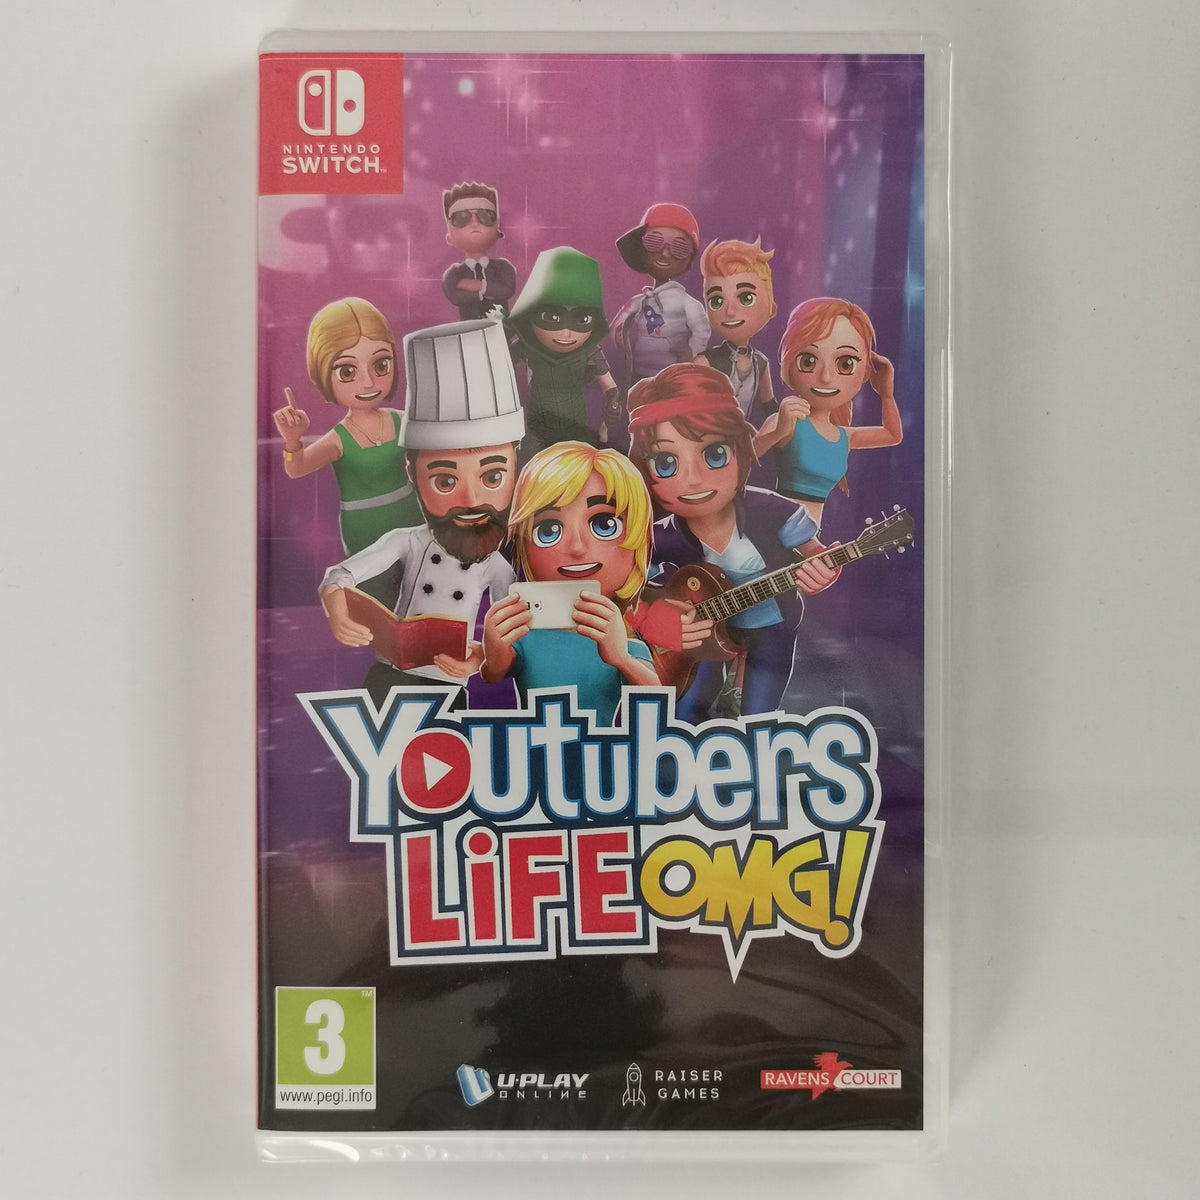 Youtubers Life Omg! (Switch) [NS]